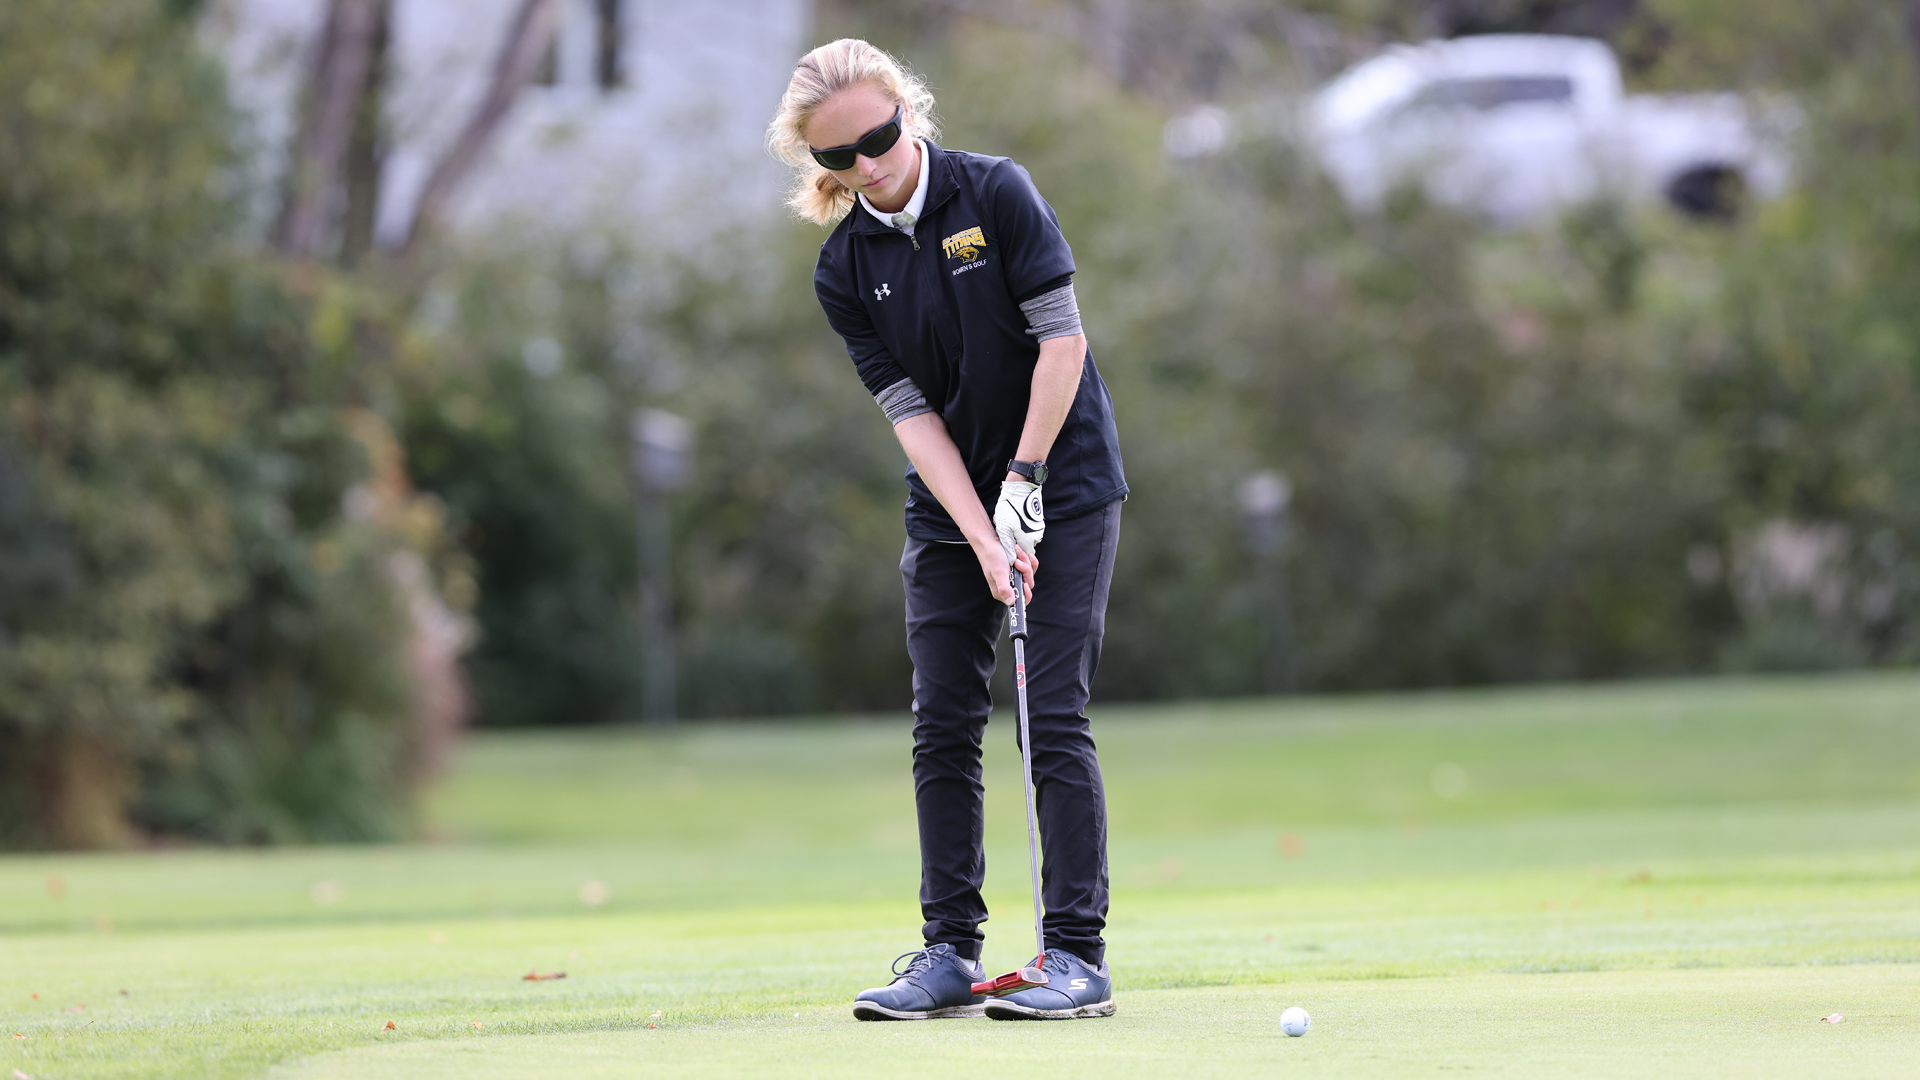 Taryn Endres recorded four birdies and 17 pars on her way to a career low 159 at the Gustie Spring Invite. Photo Credit: Steve Frommell, UW-Oshkosh Sports Information